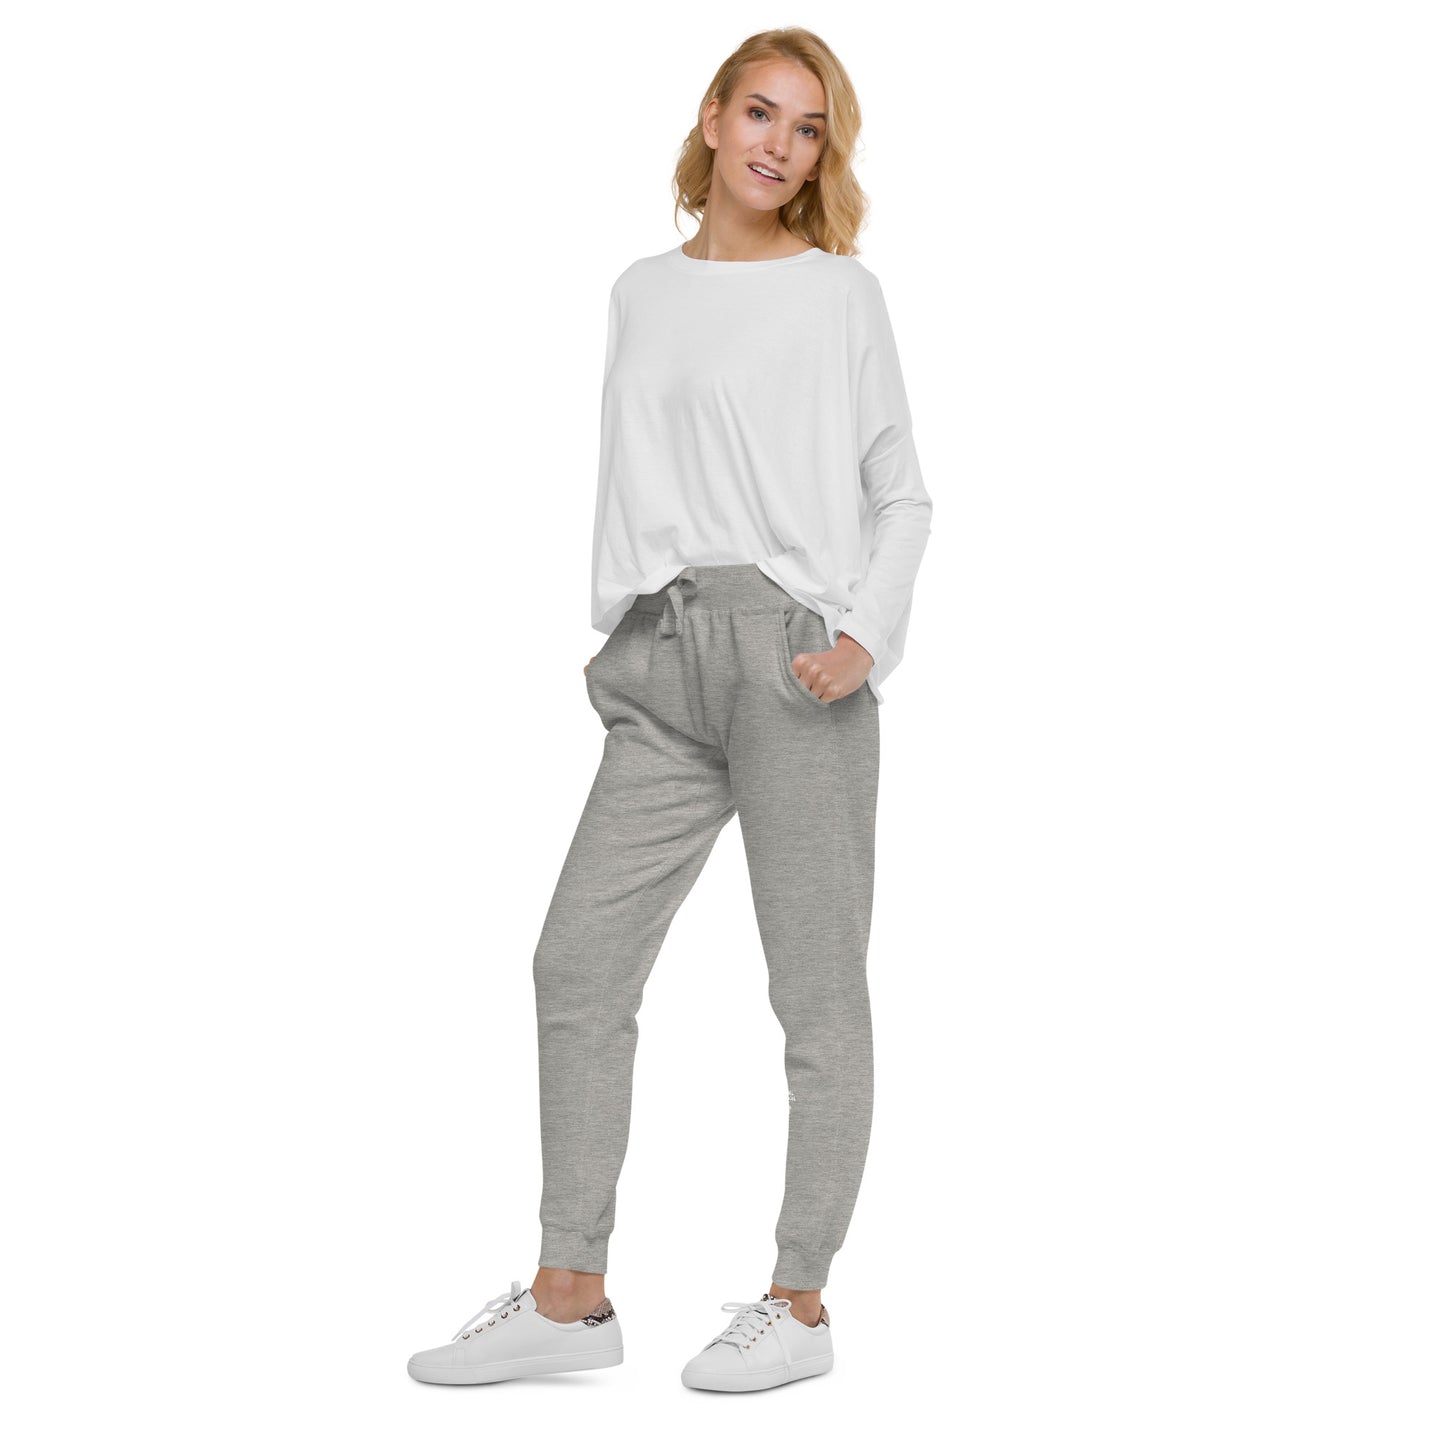 The Spring SNARL Sweats